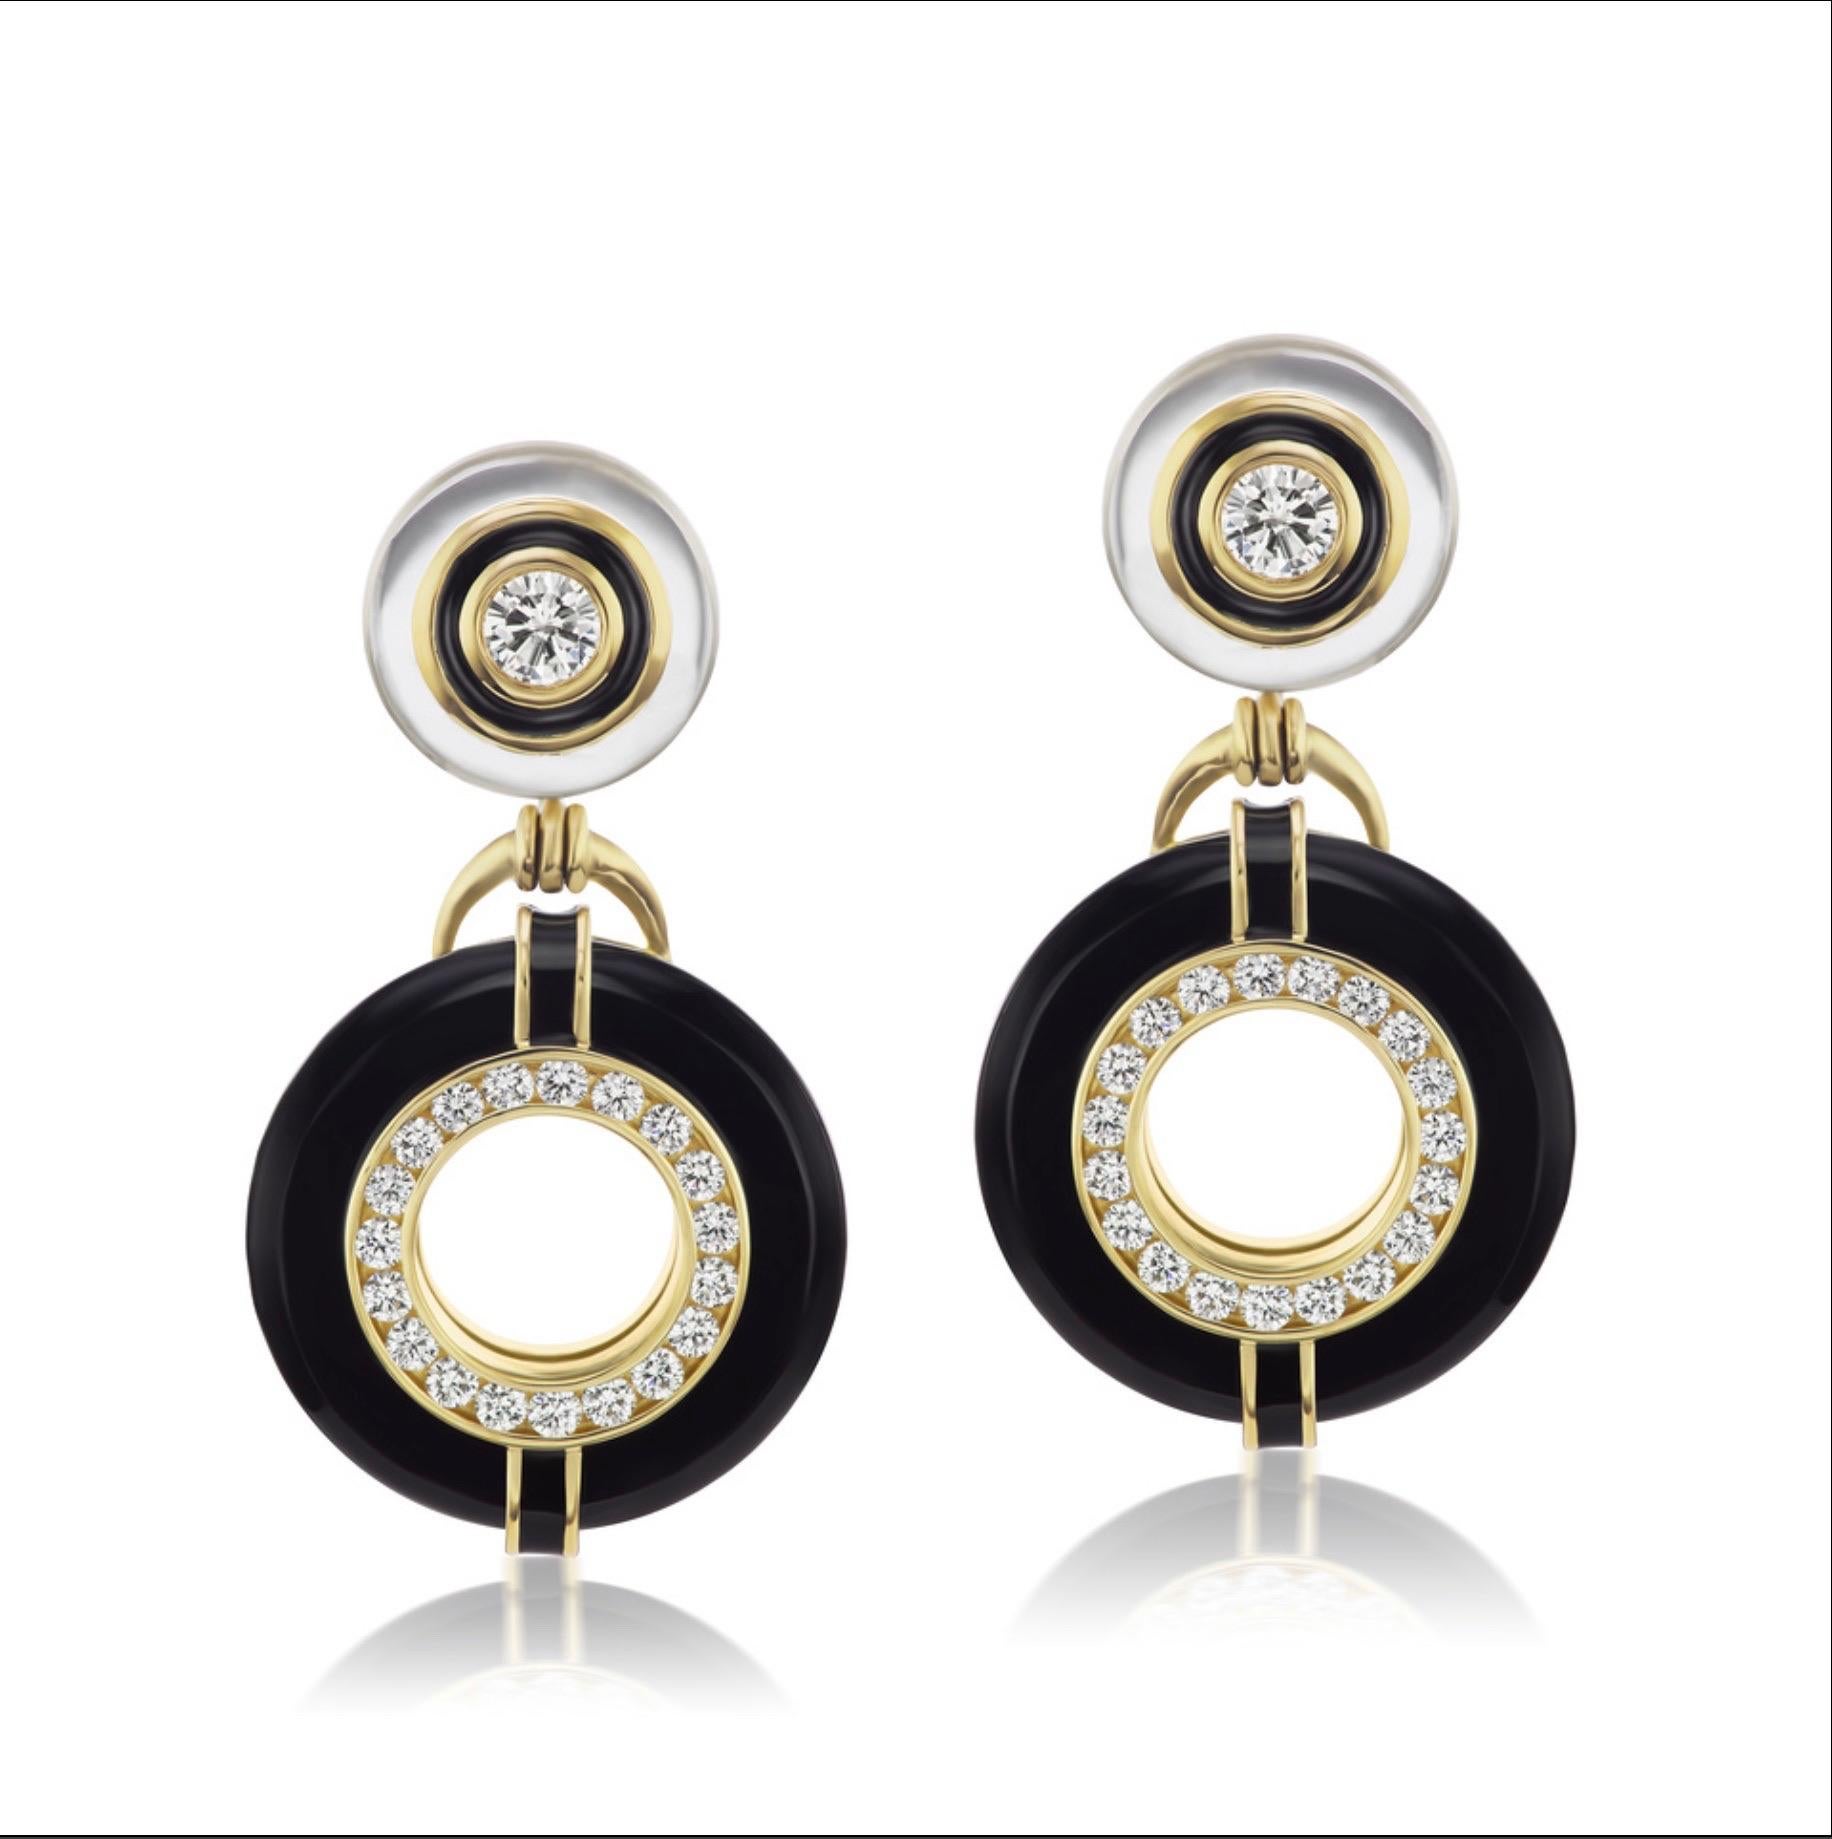 Round Cut Diamond, Onyx, and Rock Crystal Earrings with Black Enamel in 18 Yellow Gold